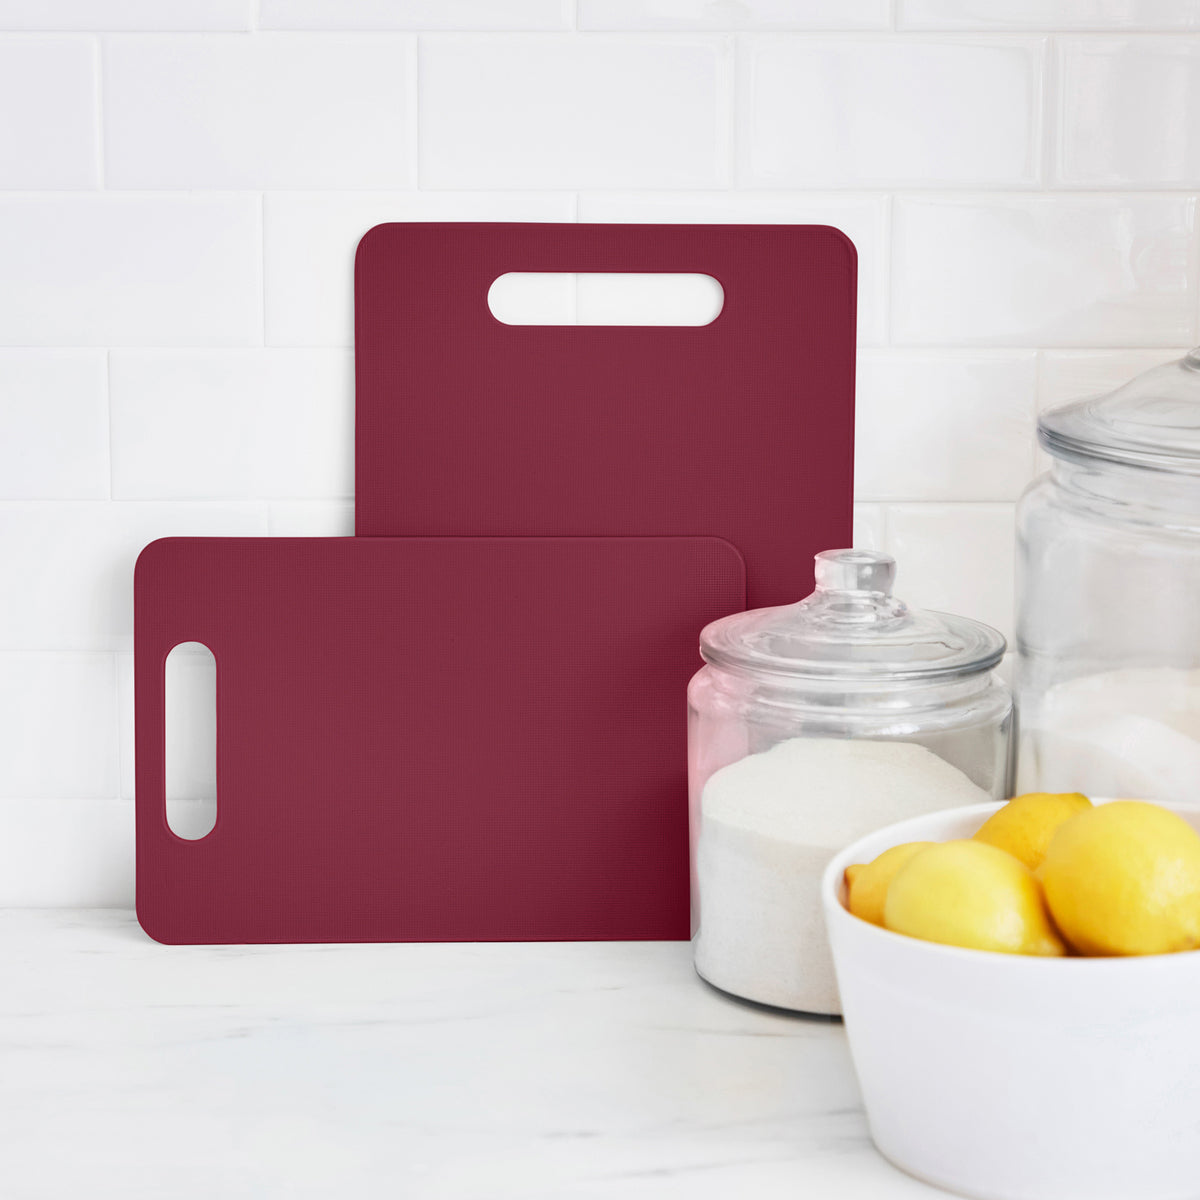 Preserve BPA-Free Cutting Board Set - Small (3 Pieces - 1 White, 1 Green  and 1 Red)